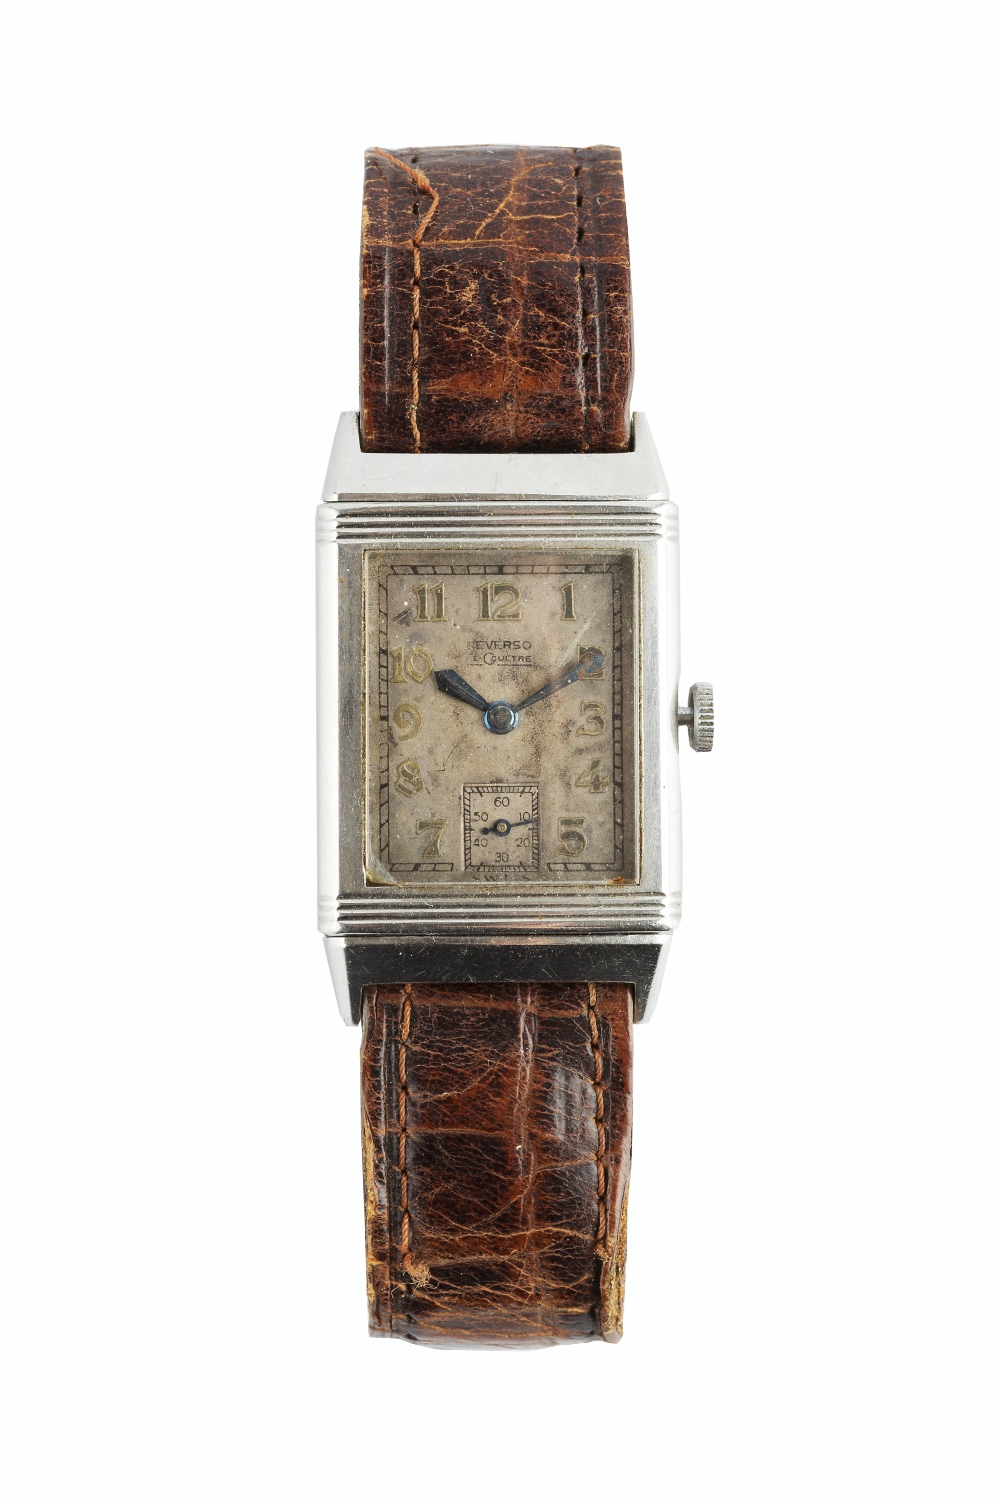 A GENTLEMAN'S STAINLESS STEEL 'REVERSO' WRISTWATCH BY LECOULTRE, the rectangular silvered dial